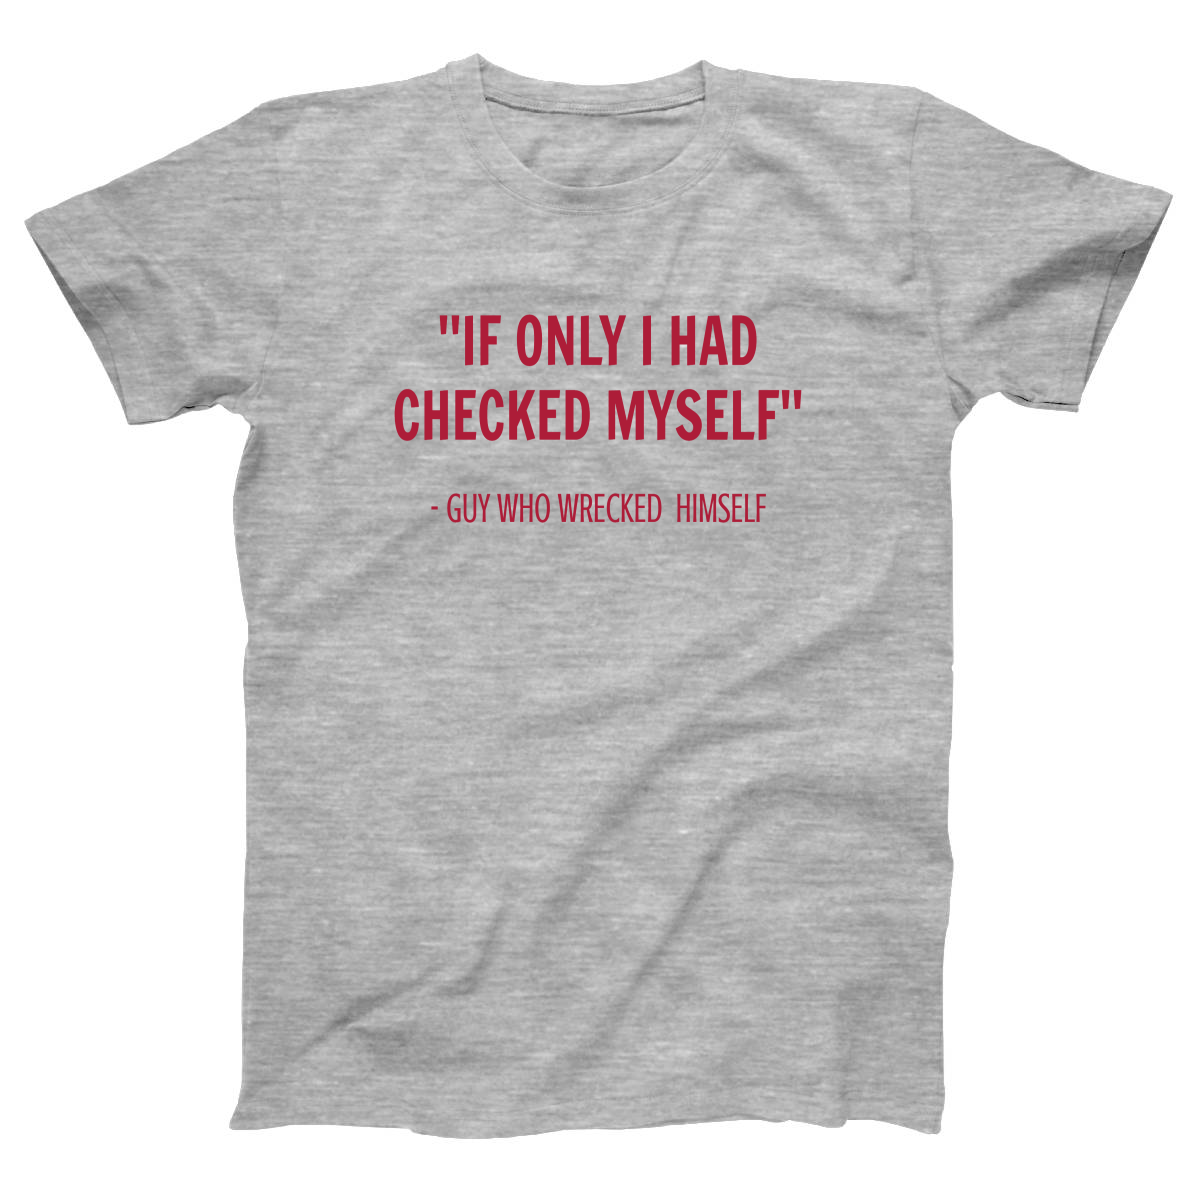 If I only had checked myself Women's T-shirt | Gray